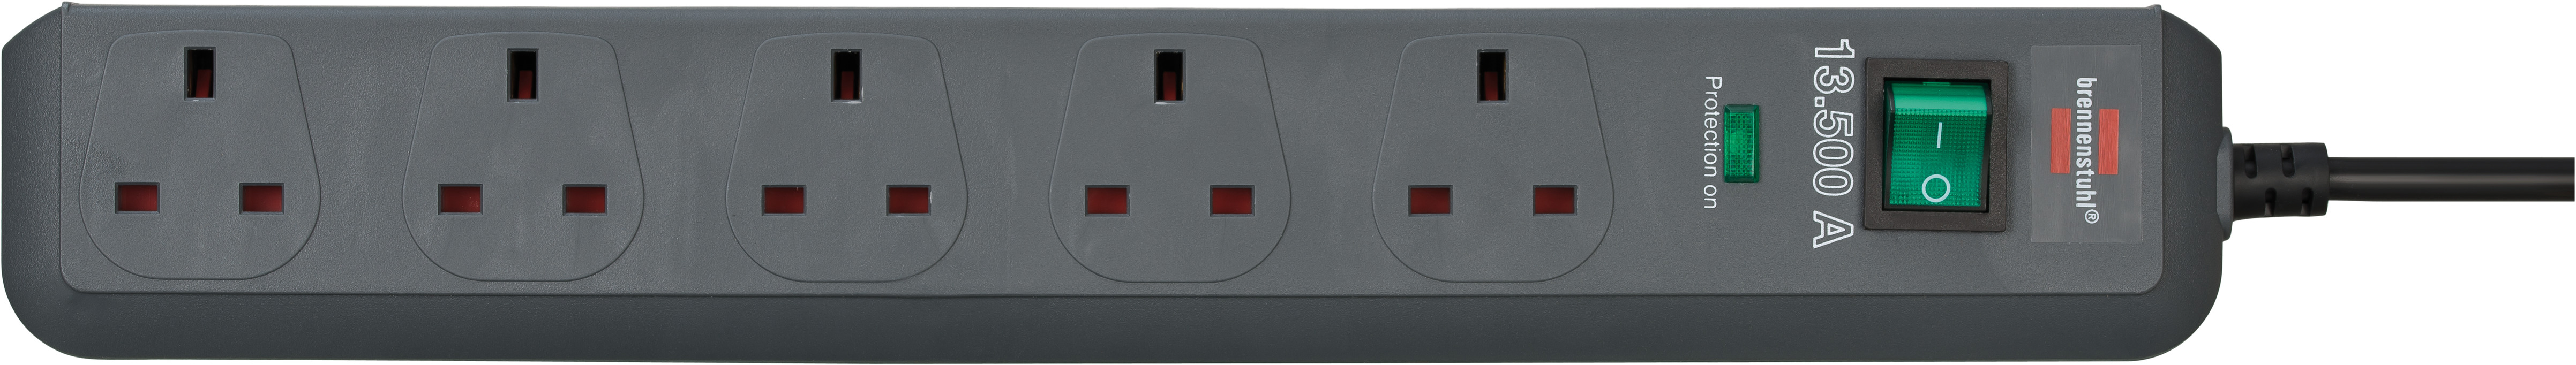 Brennenstuhl Eco-Line 13.500A extension socket with surge protection 5-way light grey 2m 05VV-F 3G1,25 *GB* 